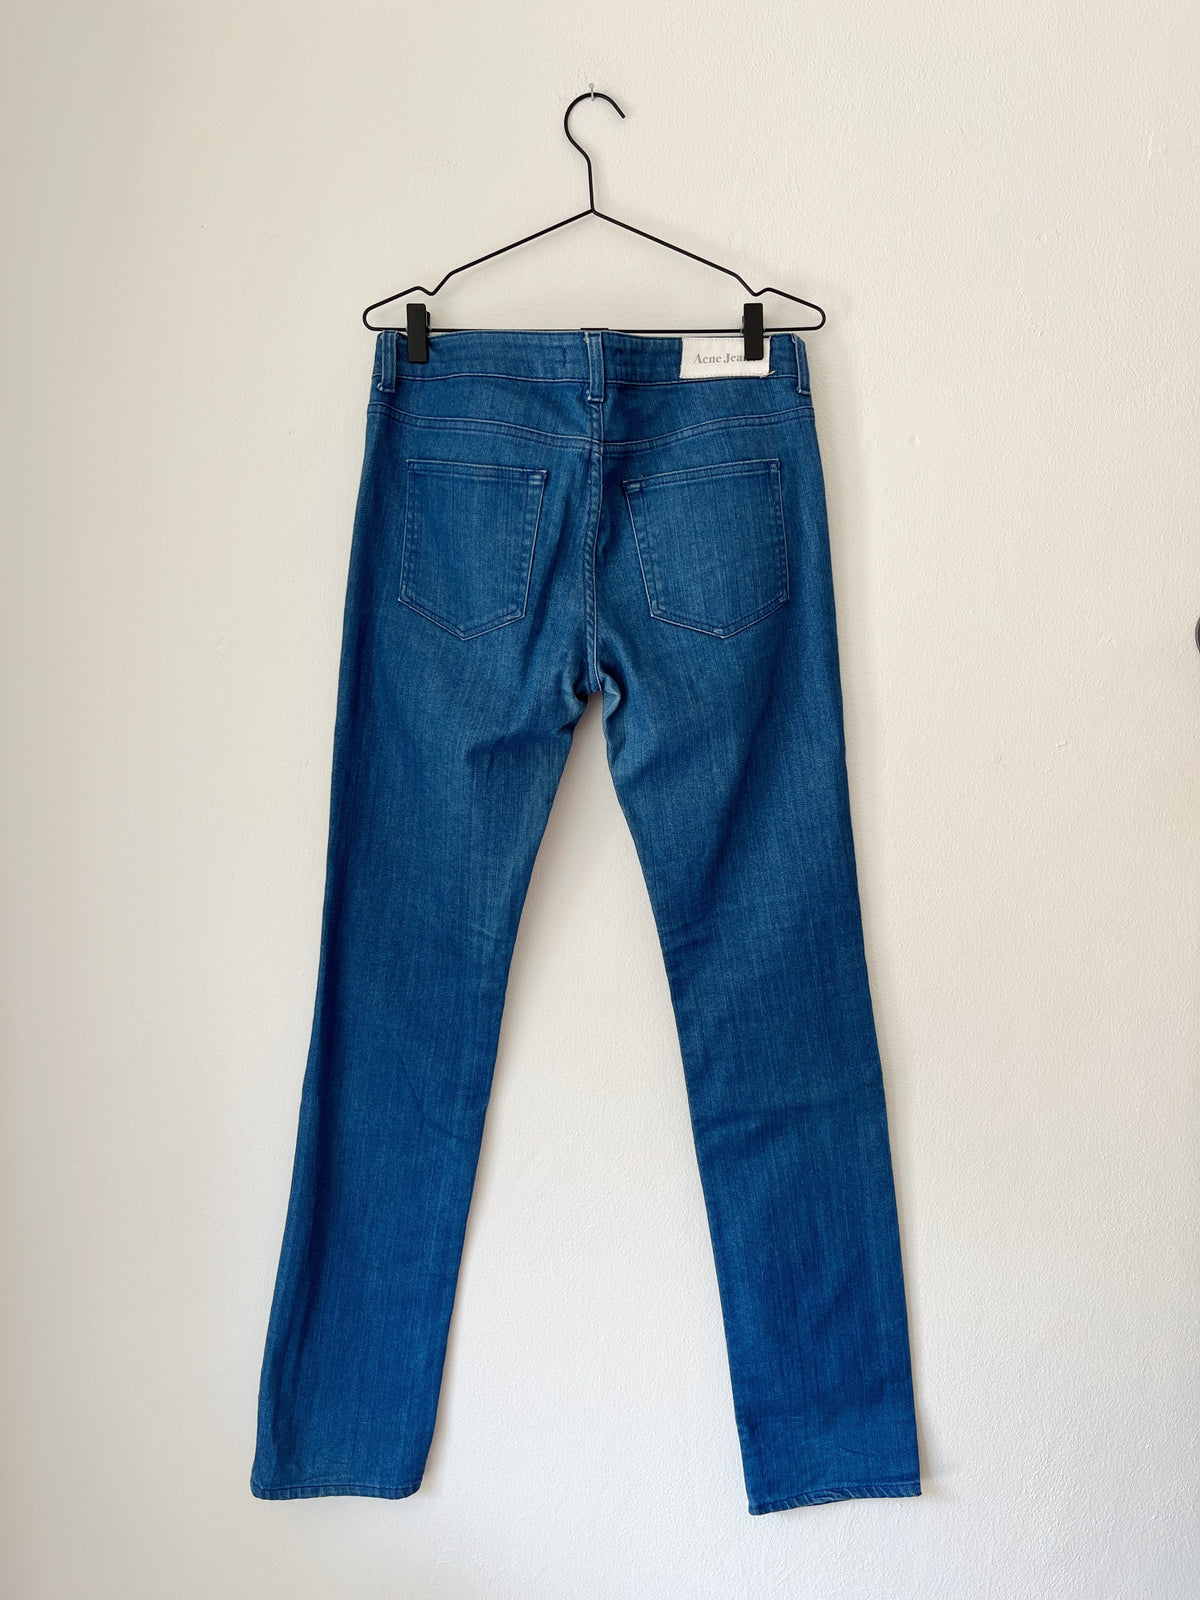 Acne “hex sky” jeans